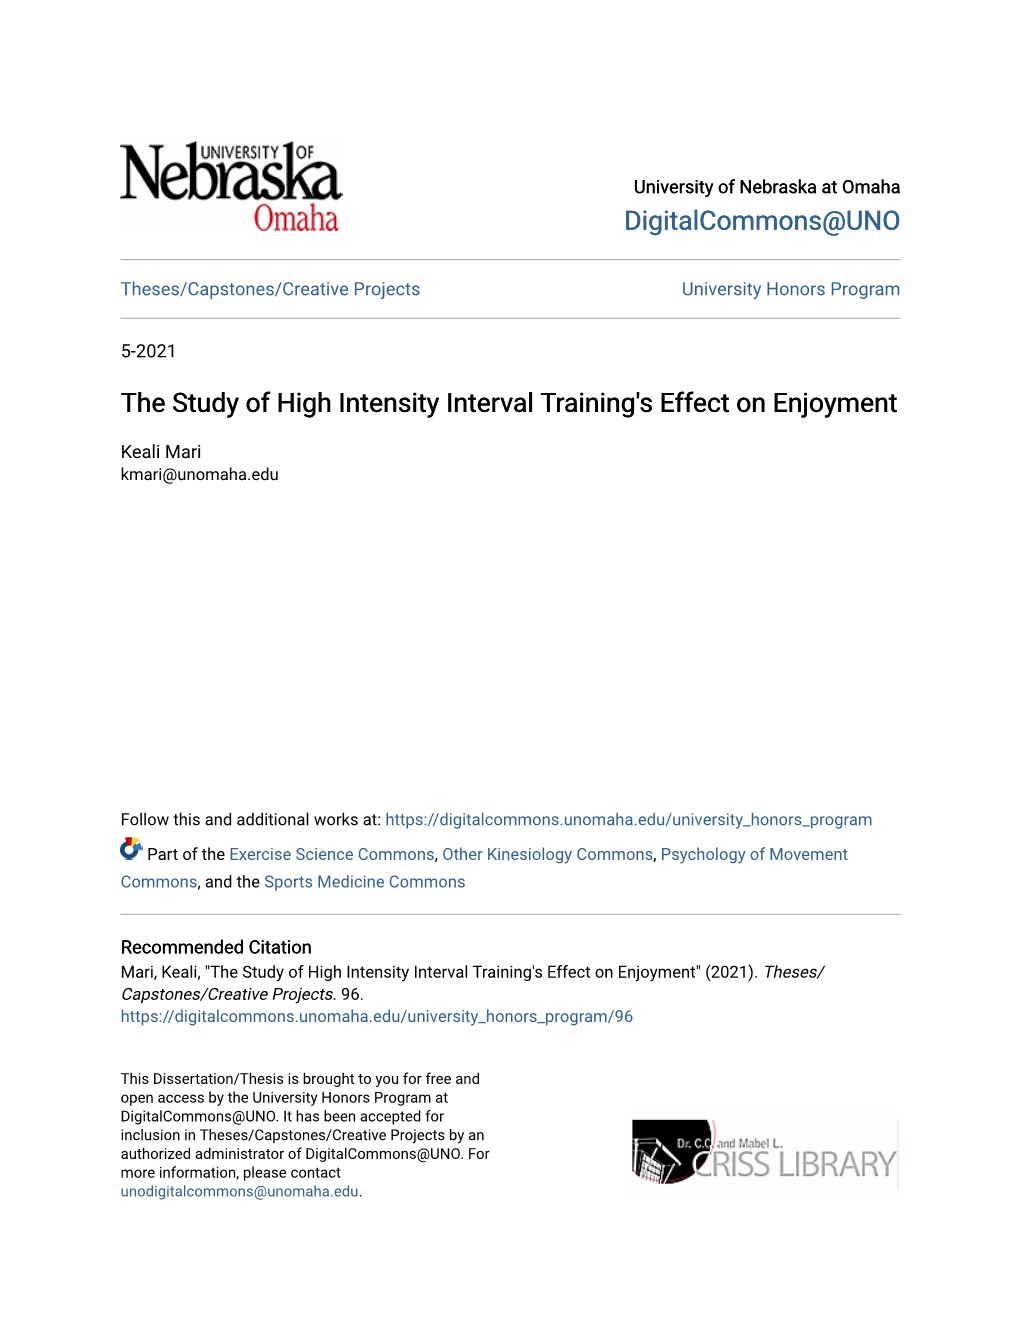 The Study of High Intensity Interval Training's Effect on Enjoyment